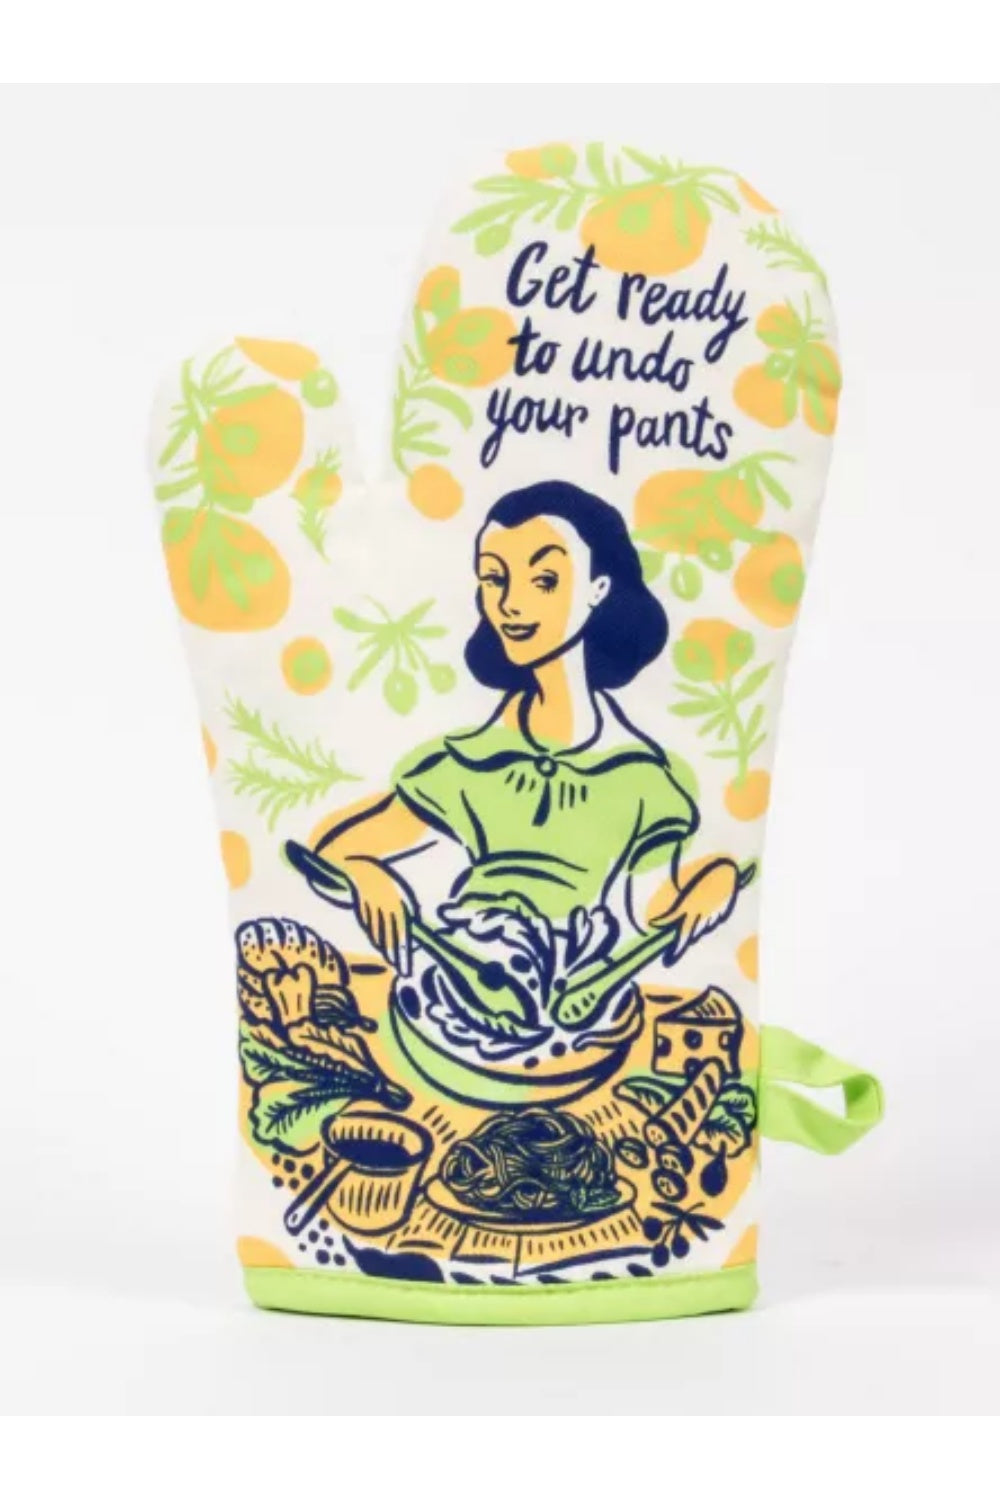 GET READY TO UNDO YOUR PANTS OVEN MITT